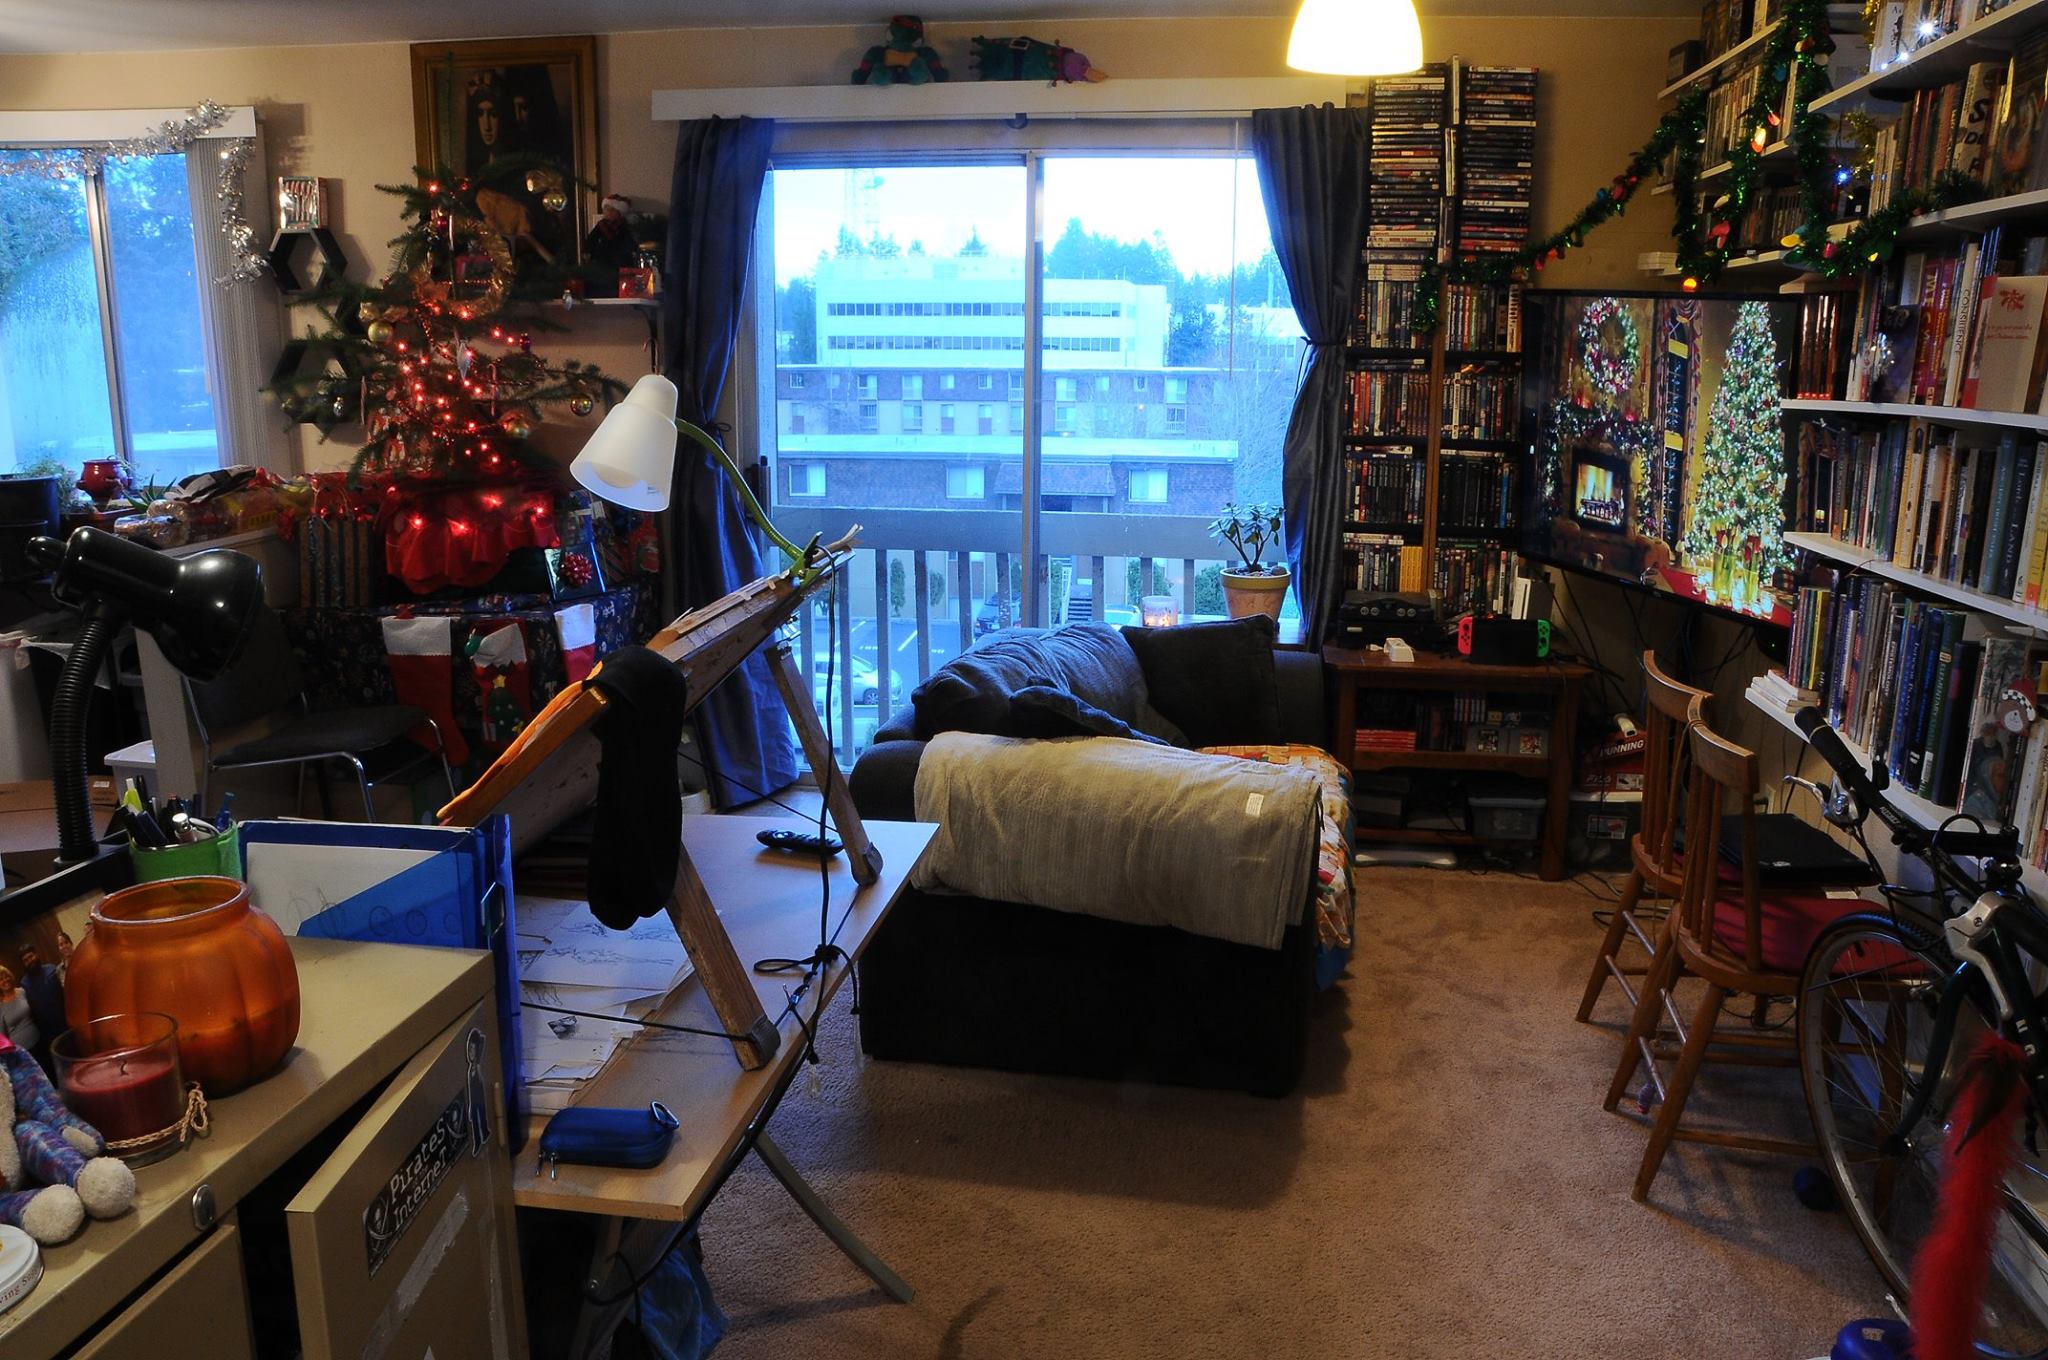 Living room in 2018. A sparse christmas tree to the left of frame. A home made easel for Morrie to draw on. The CRT has been replaced with aN LCD television, and the bean bag with a loveseat that barefly fits in the middle of the room.